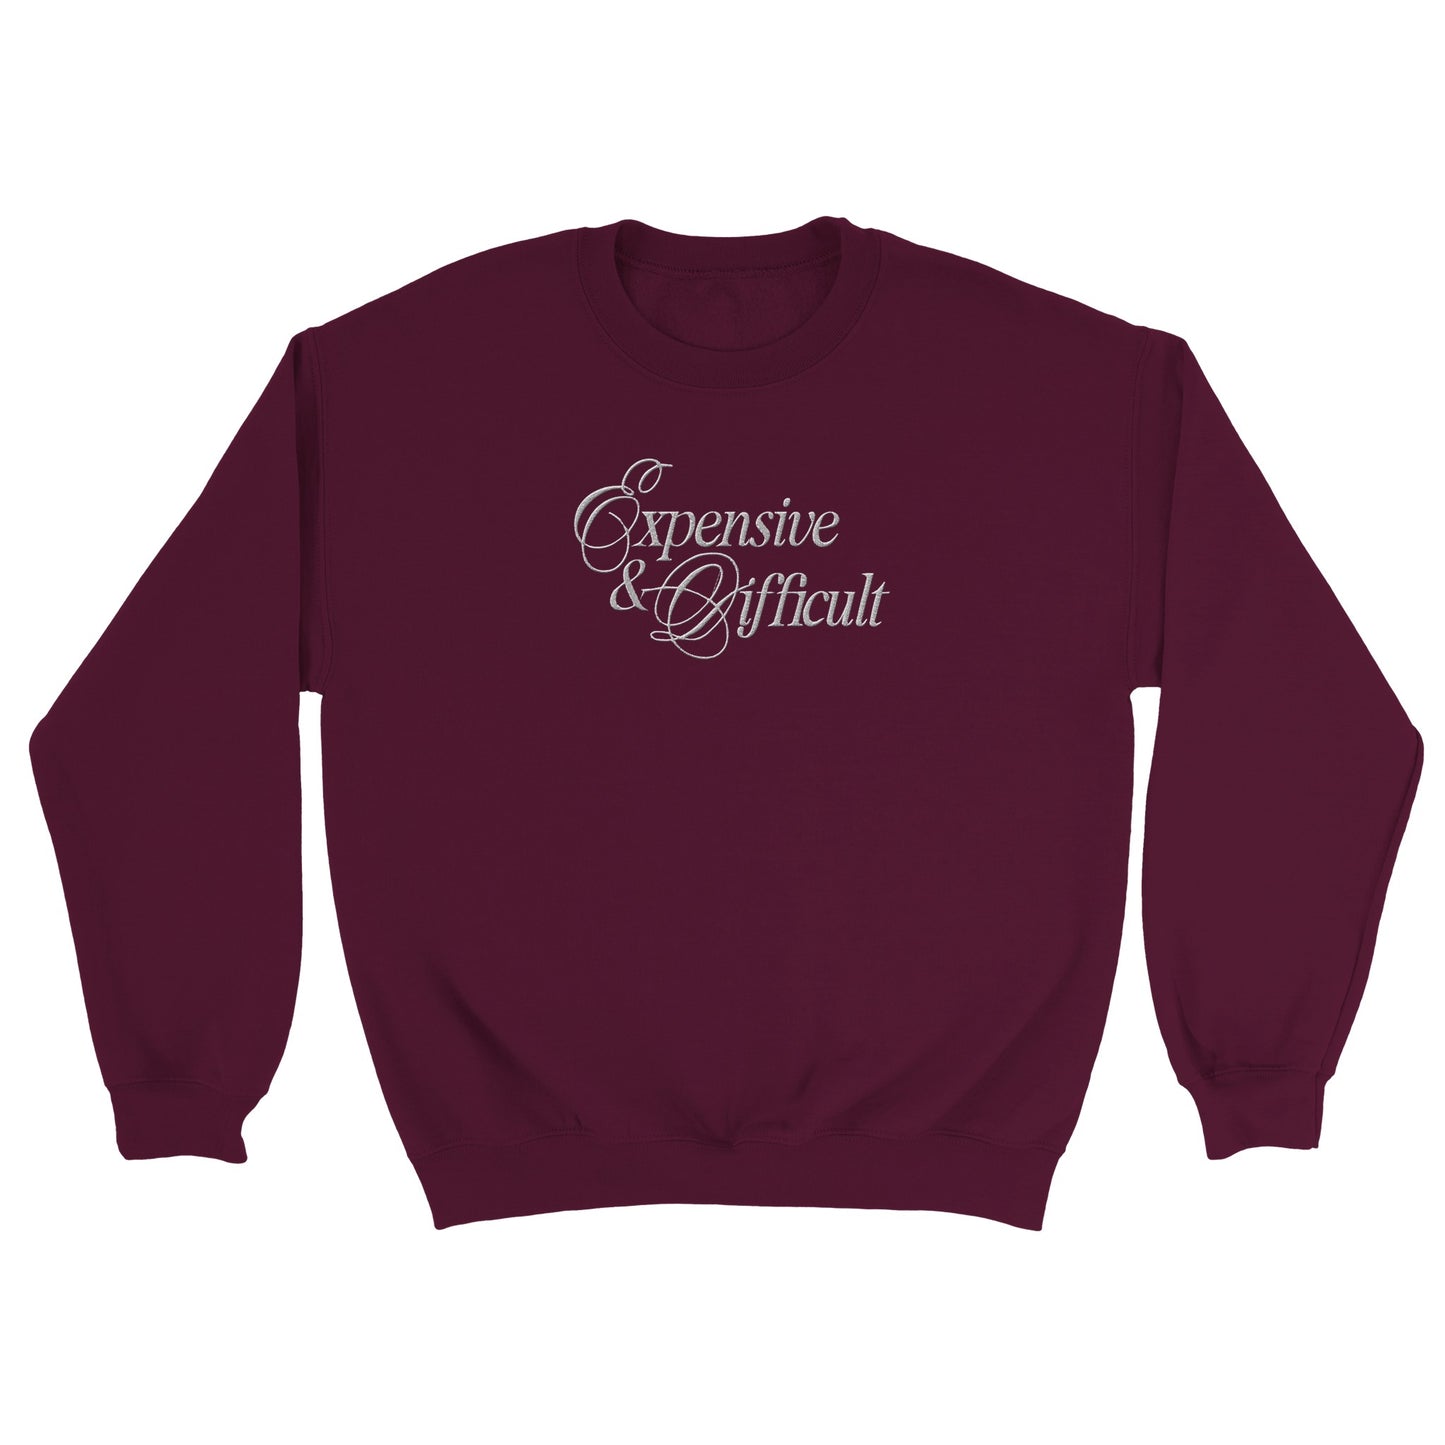 expensive and difficult embroidered on a maroon sweatshirt